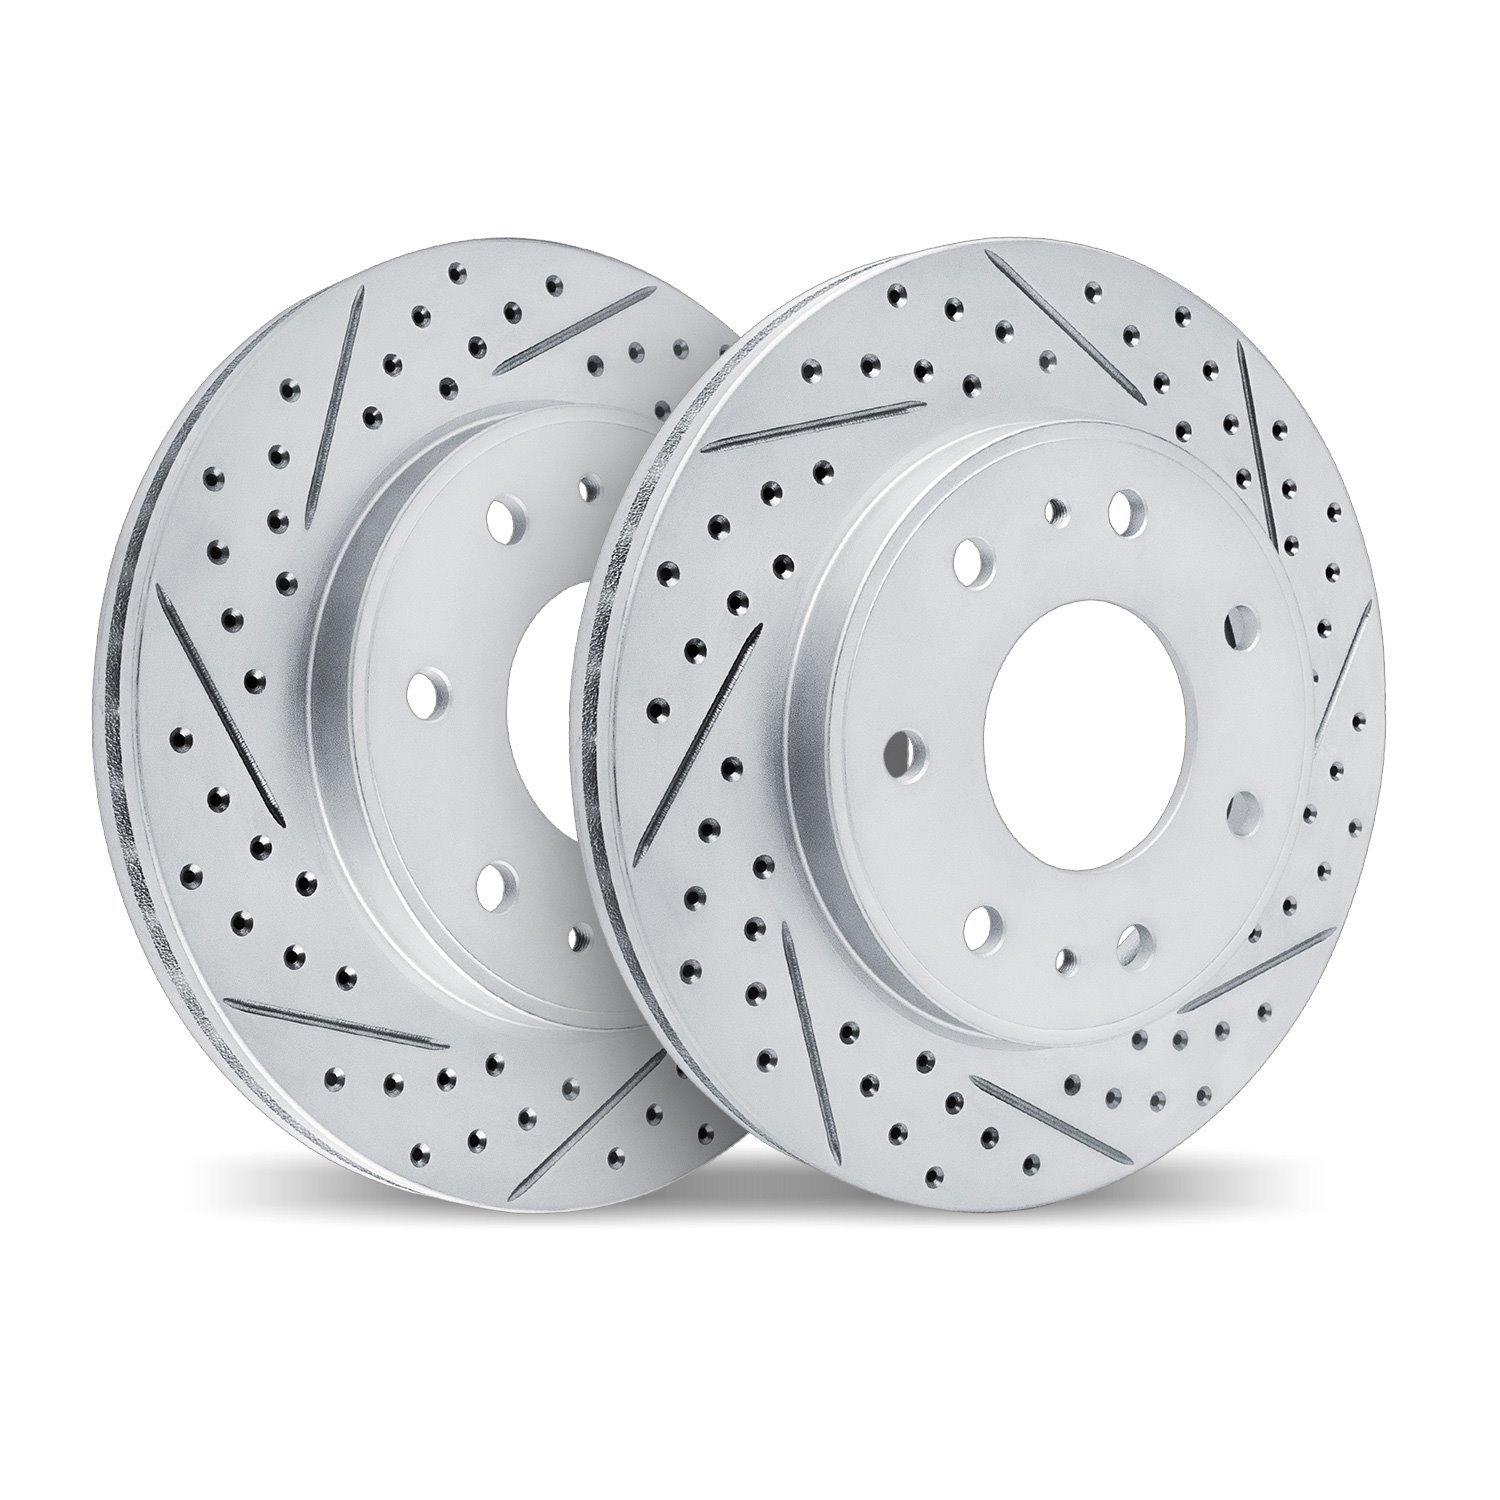 2002-54054 Geoperformance Drilled/Slotted Brake Rotors, 2004-2008 Ford/Lincoln/Mercury/Mazda, Position: Front